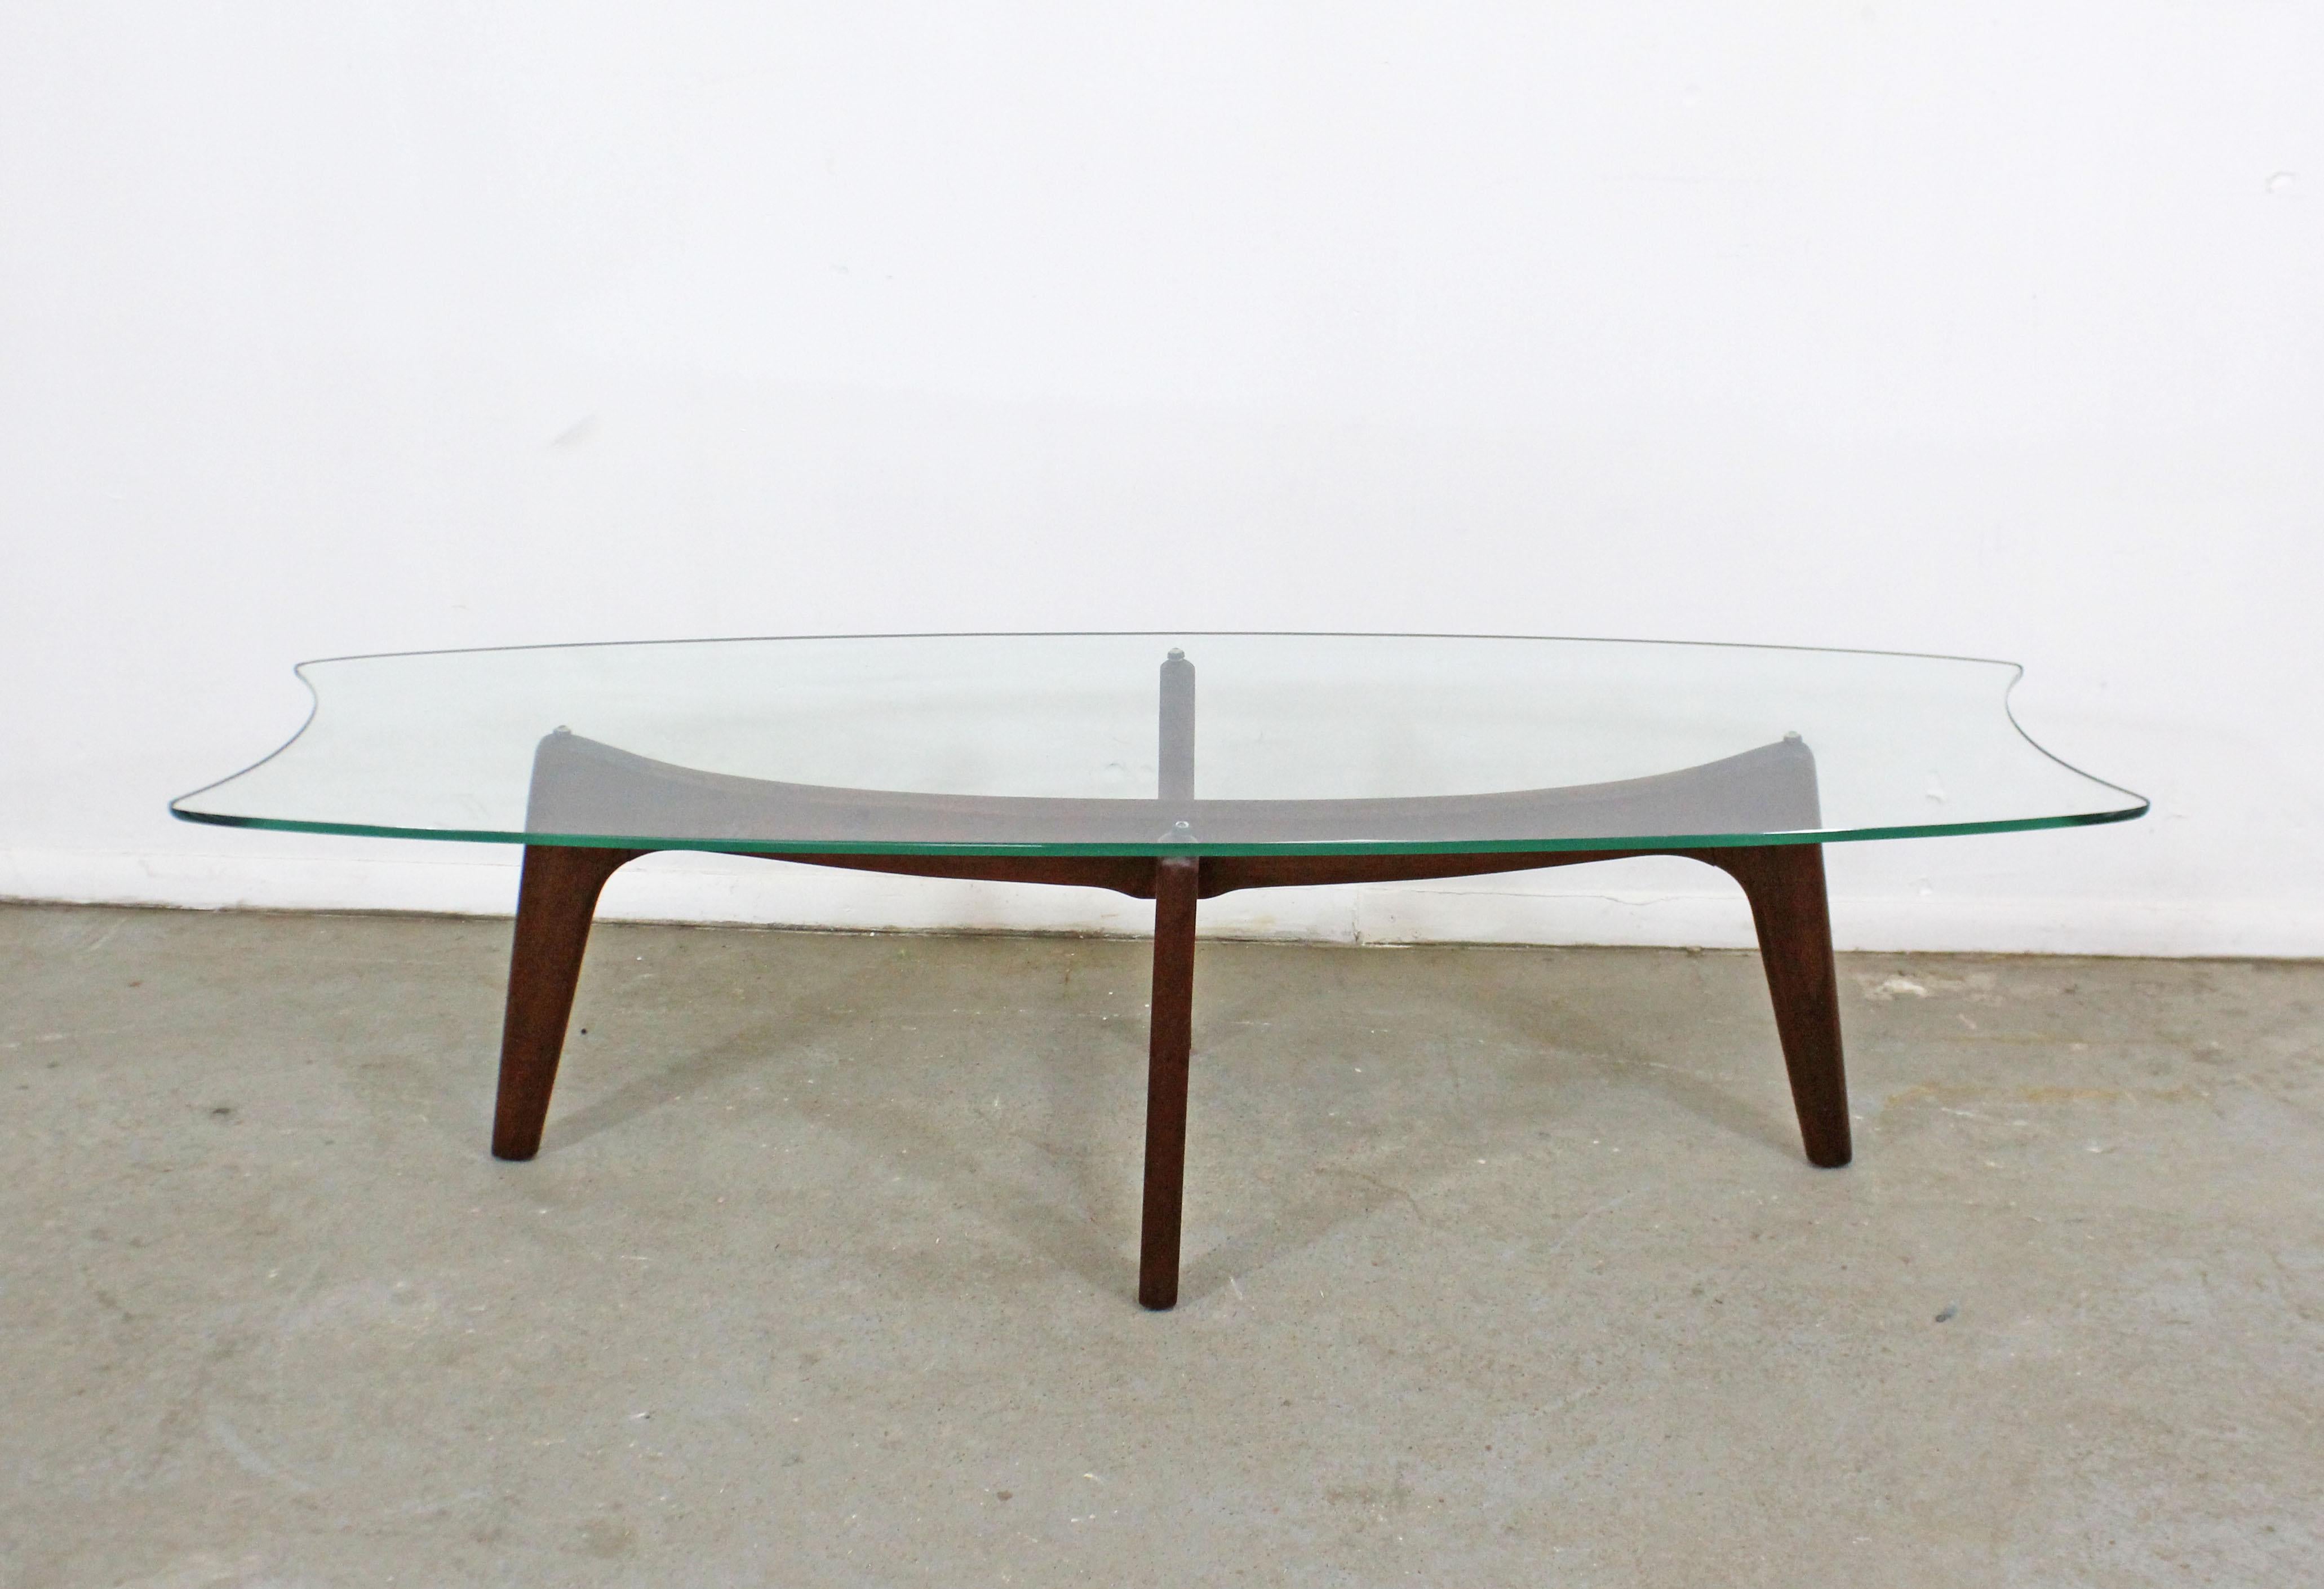 Offered is an authentic Adrian Pearsall 'Stingray' coffee table with a gorgeous sculptural wooden base and glass top. It was designed by Adrian Pearsall for Craft Associates. It is in good condition for its age, shows surface scratches on glass top